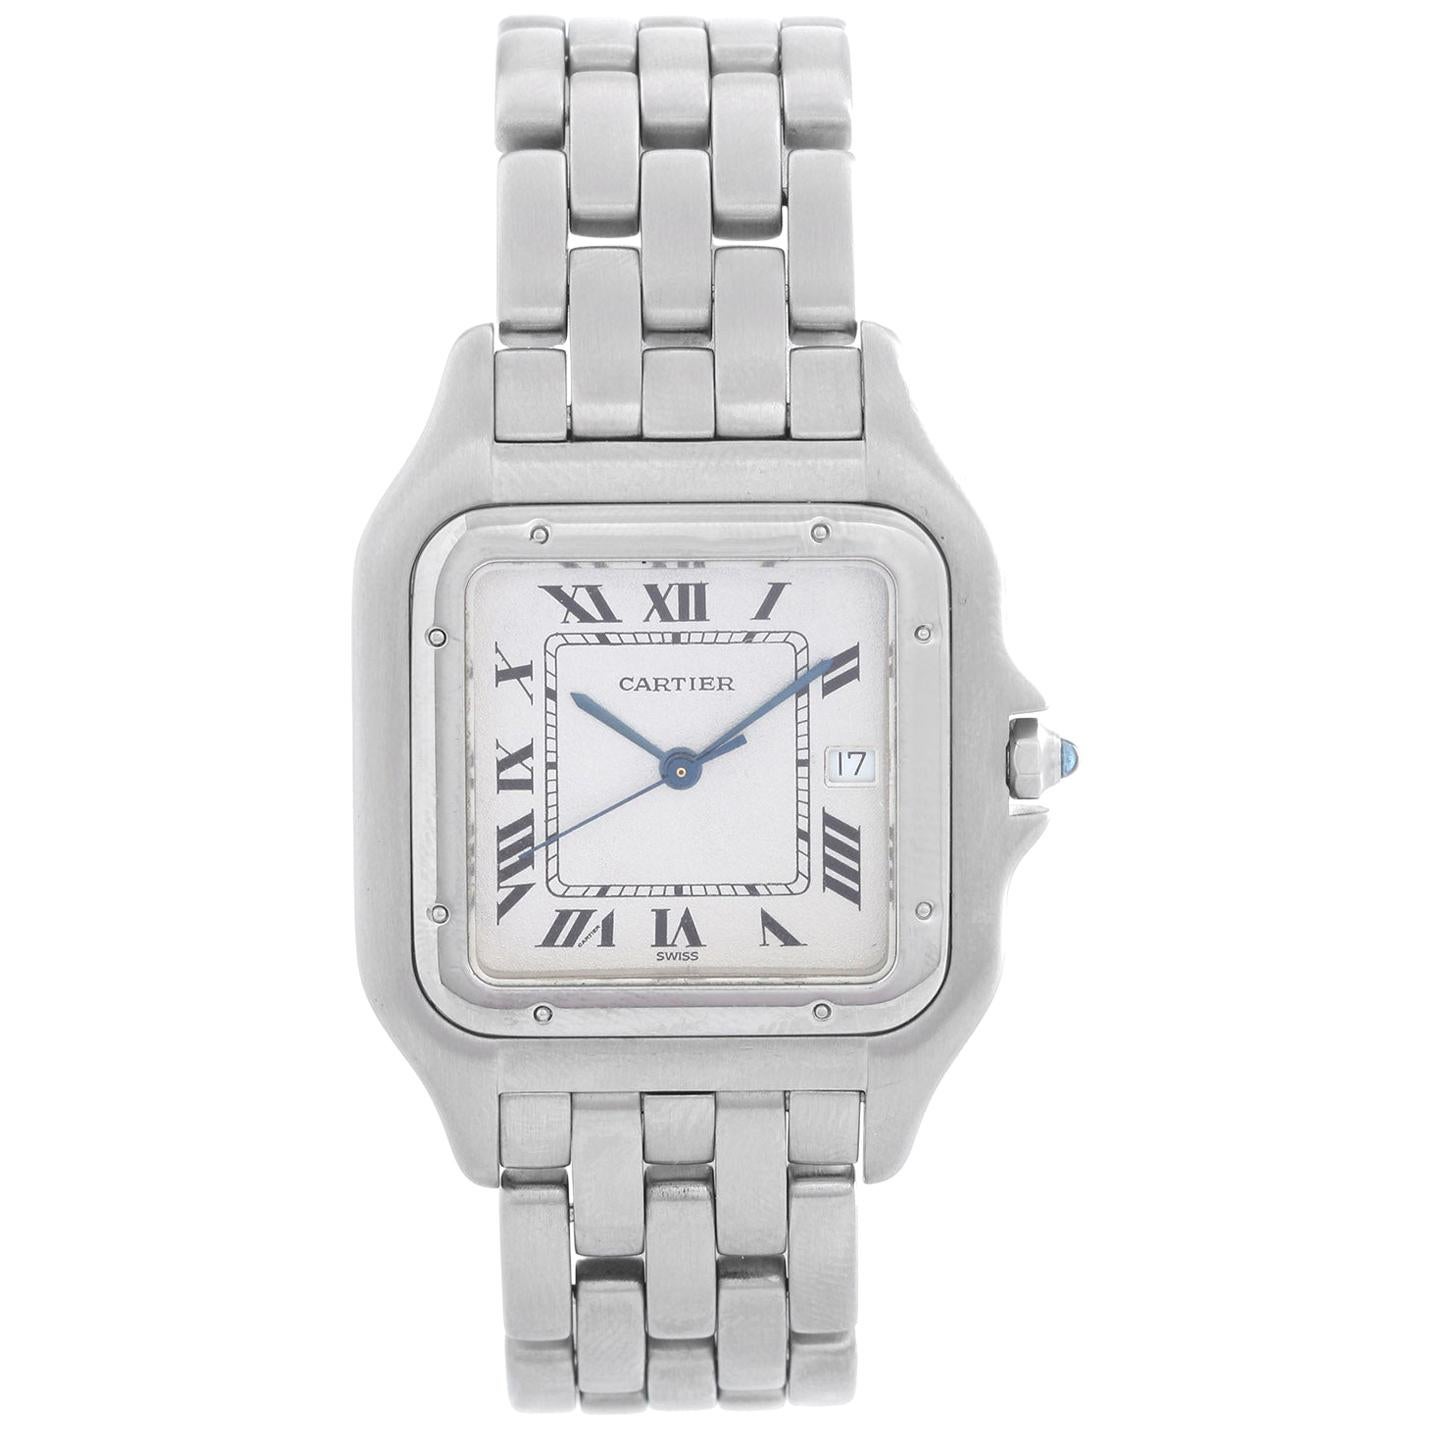 Cartier Panther Stainless Steel Men's Quartz Watch with Date